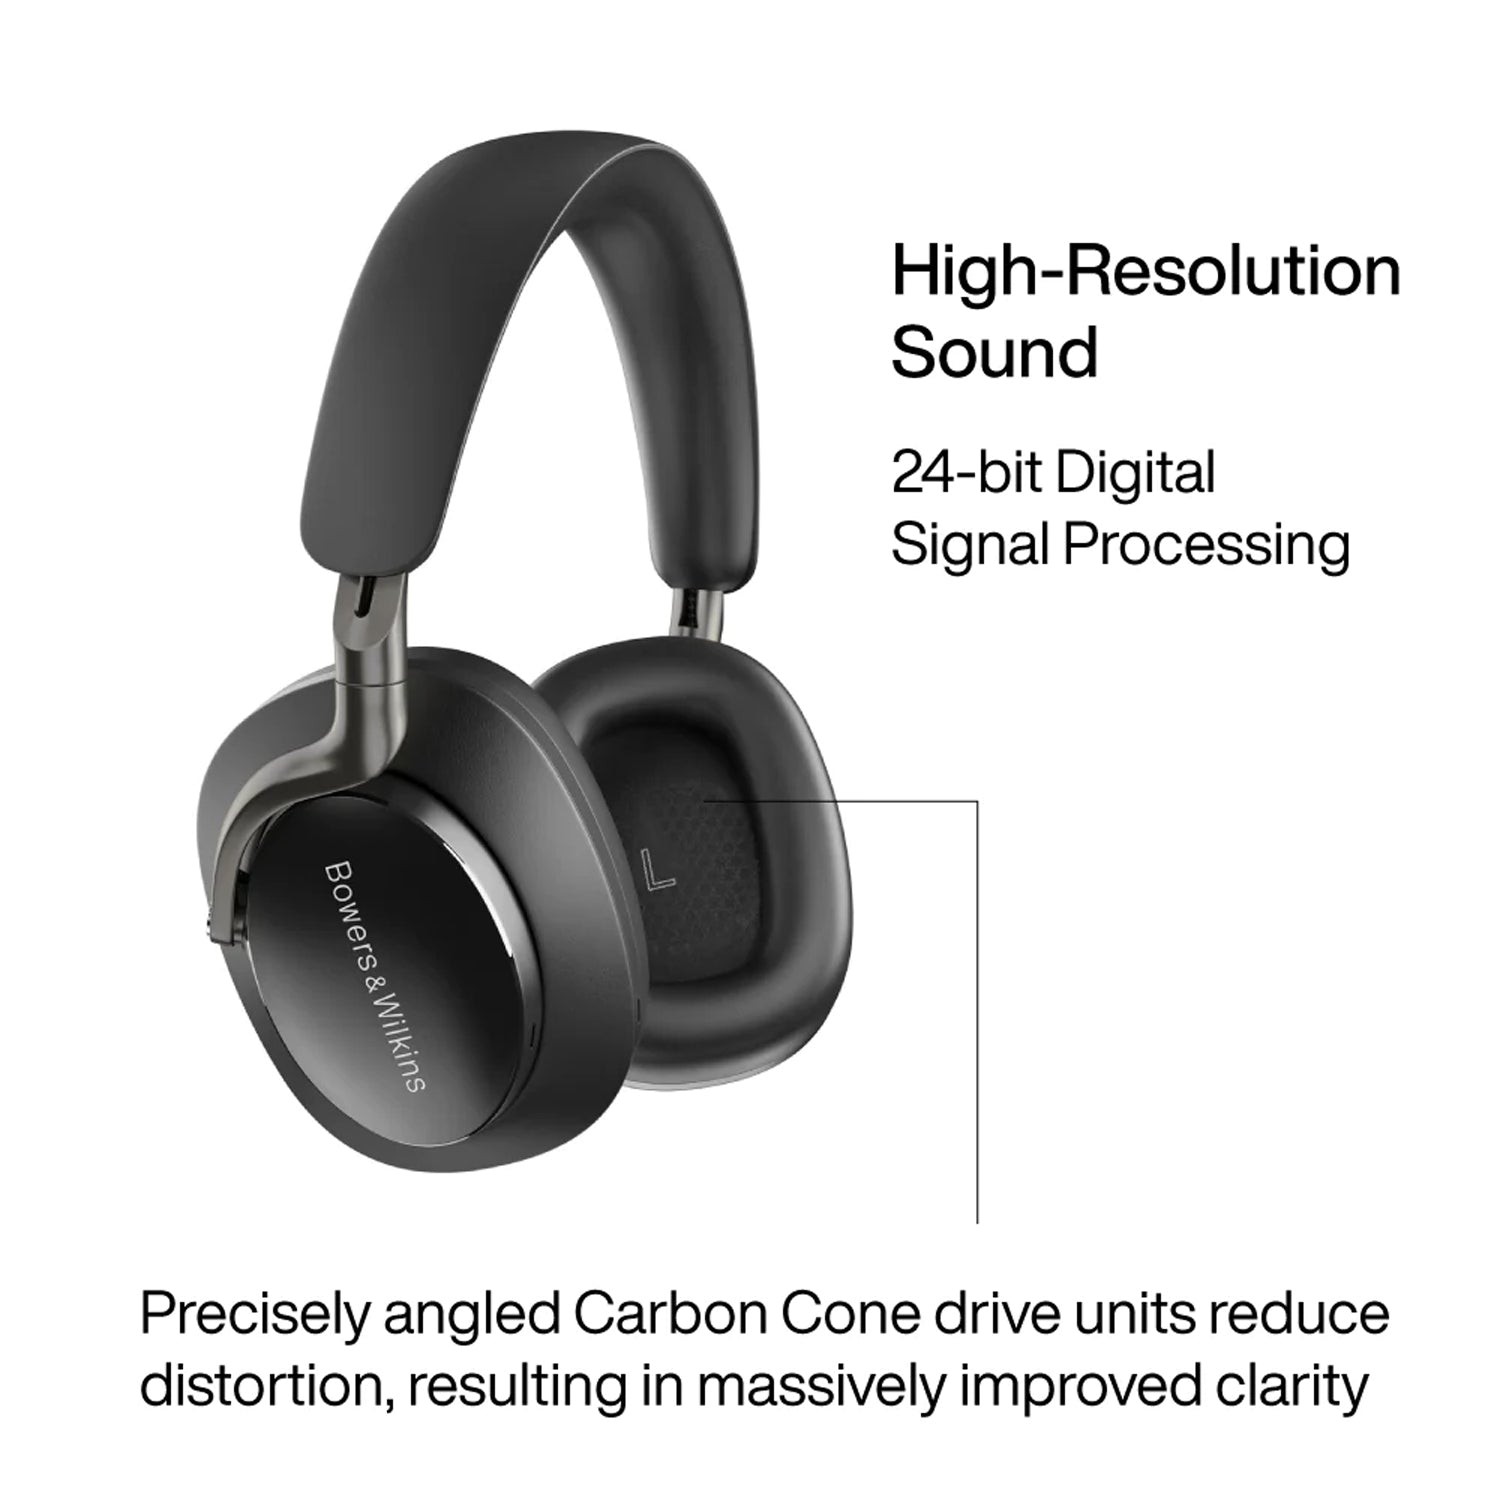 Bowers & Wilkins Px8 Over-Ear Noise-Cancelling Headphones